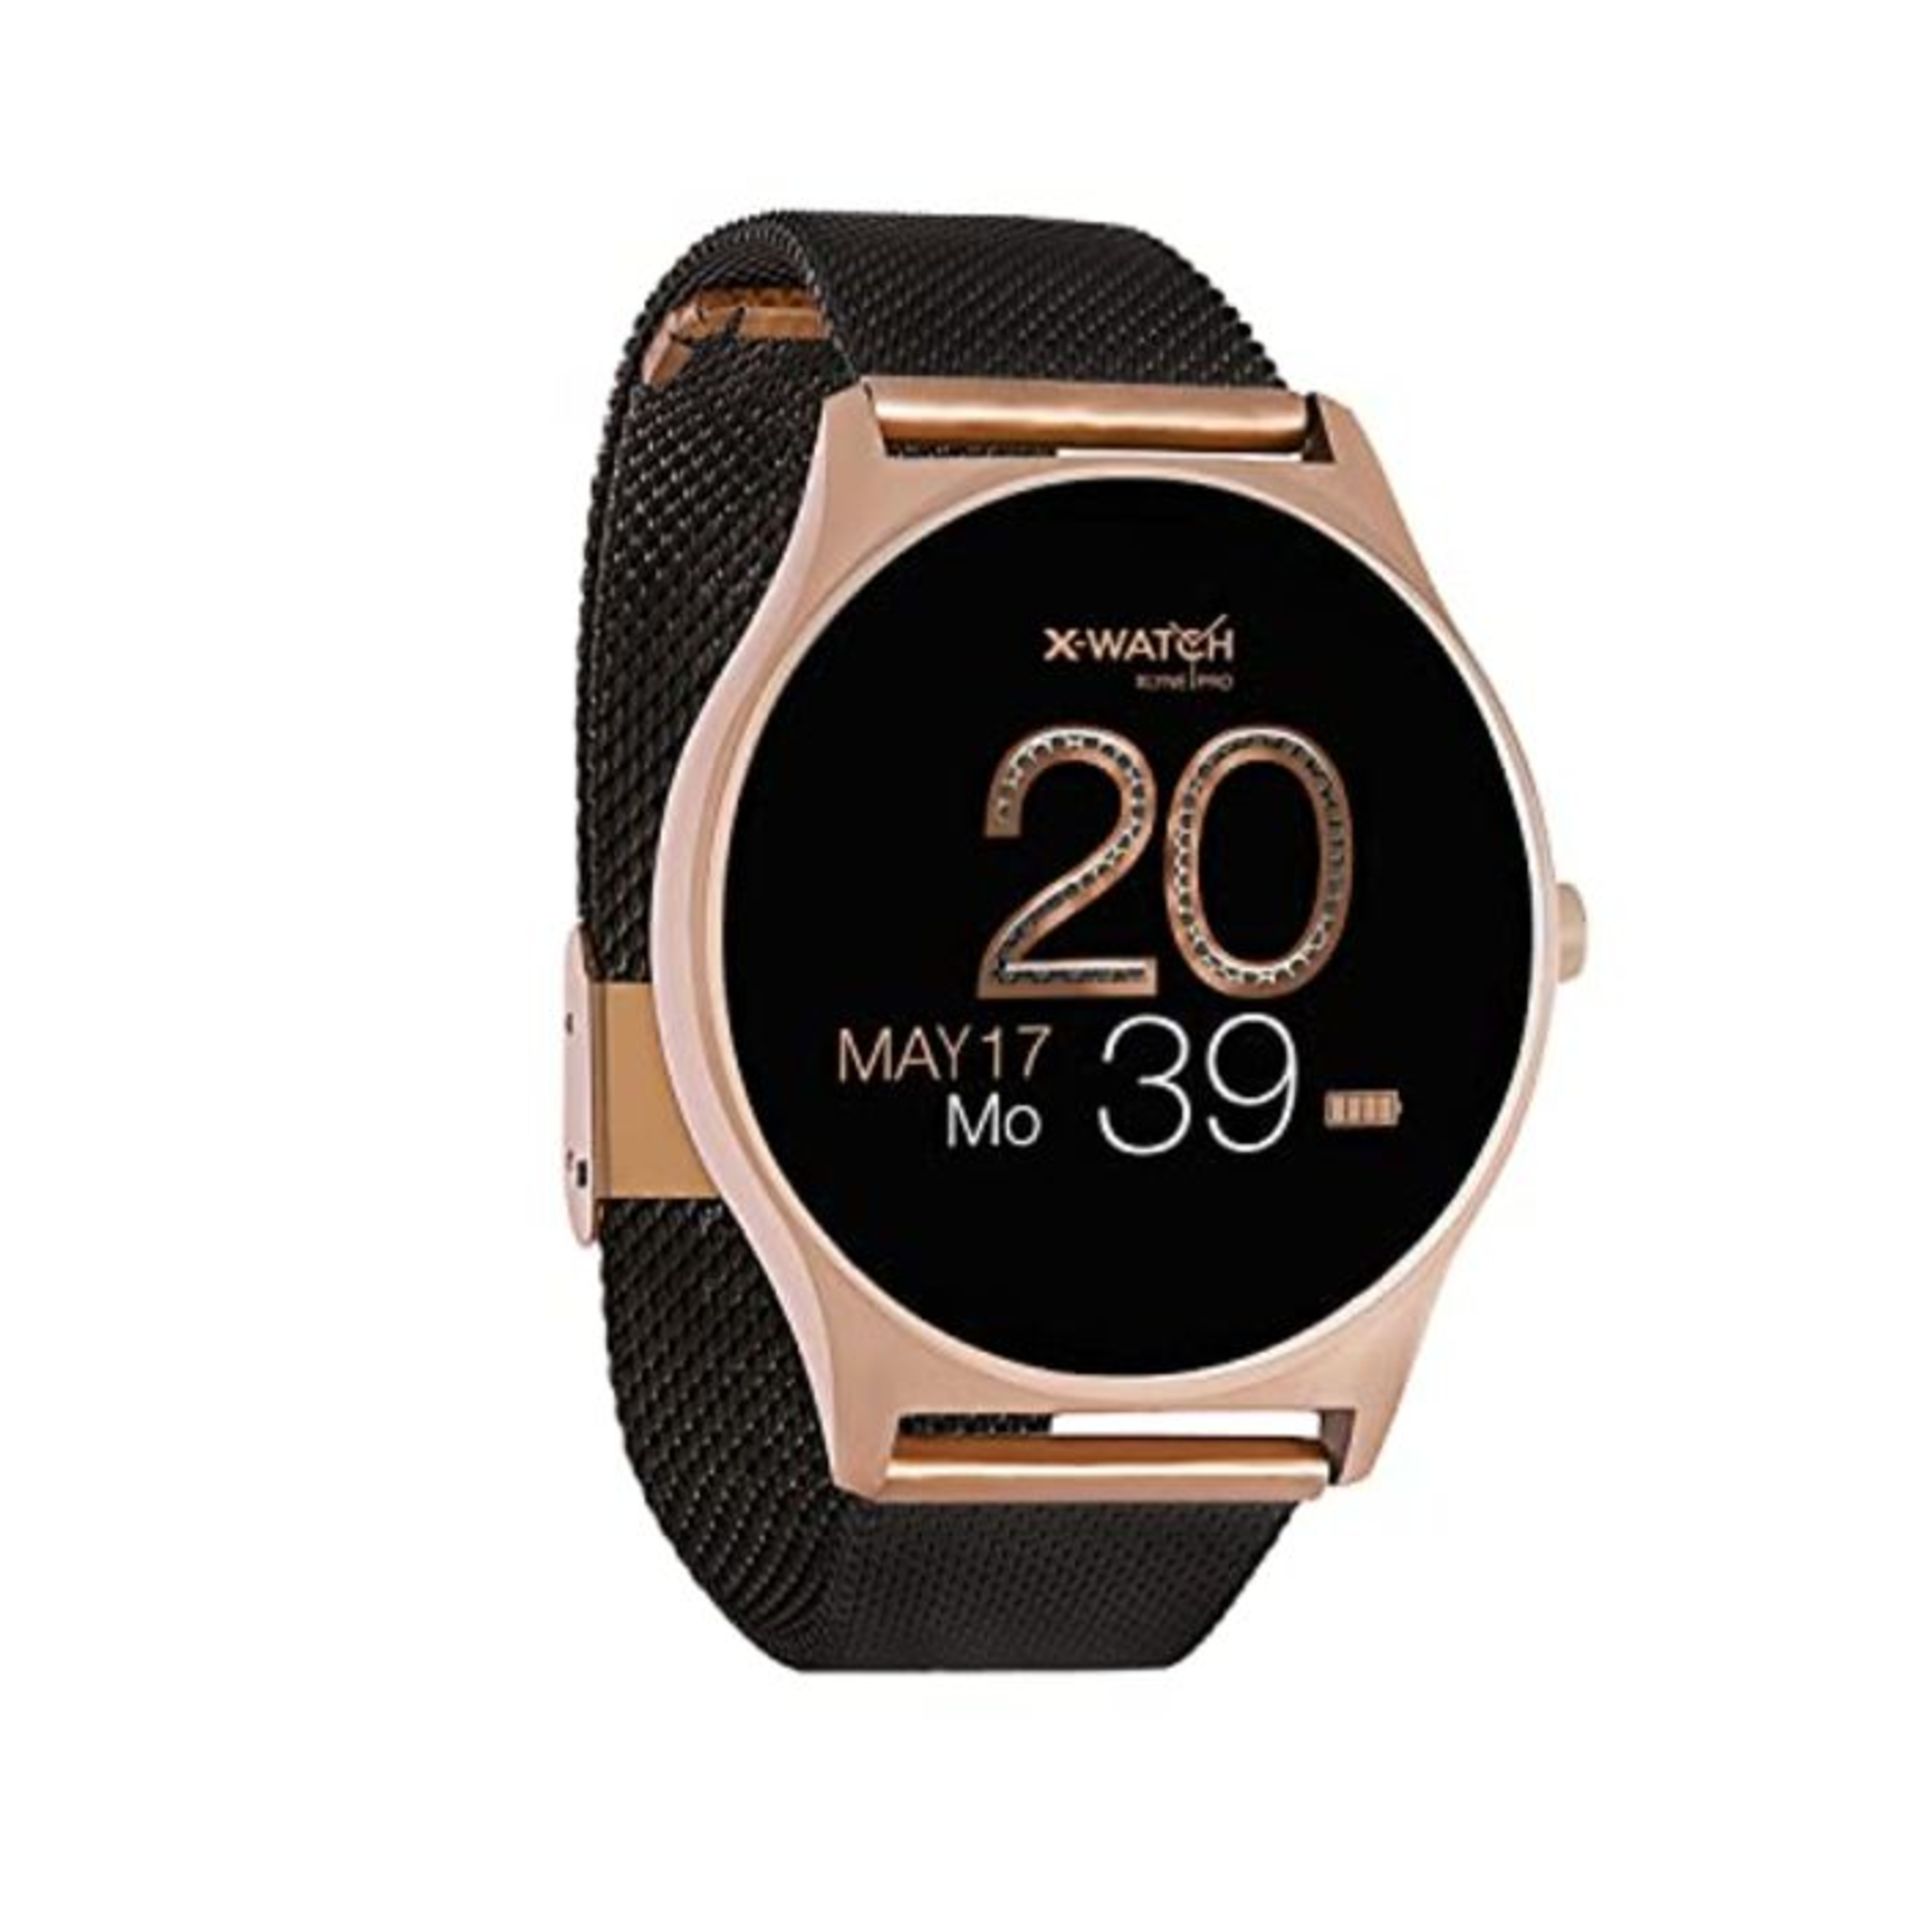 RRP £74.00 [INCOMPLETE] X-WATCH JOLI XW PRO-Smartwatch Damen iOS/iPhone-Fitnessuhr-Android mit Wh